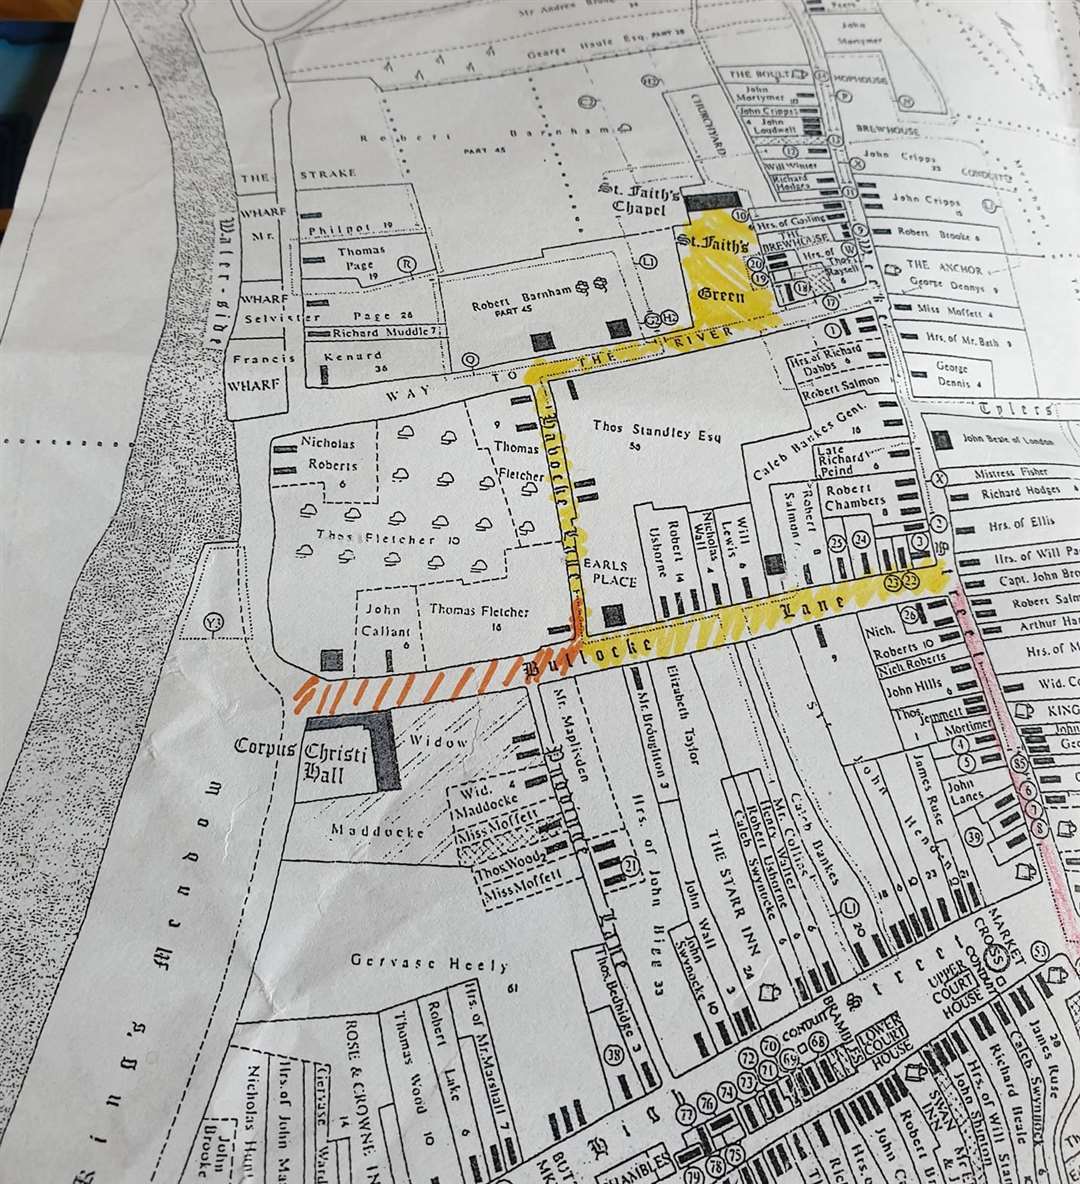 A 1650 map of Maidstone. The yellow markings show the route the defenders retreated to St Faith's Church, via Bullocke Lane (now Earl Street) and along "Havocke Lane". Supplied by the 'History of Maidstone and Beyond' Facebook page.